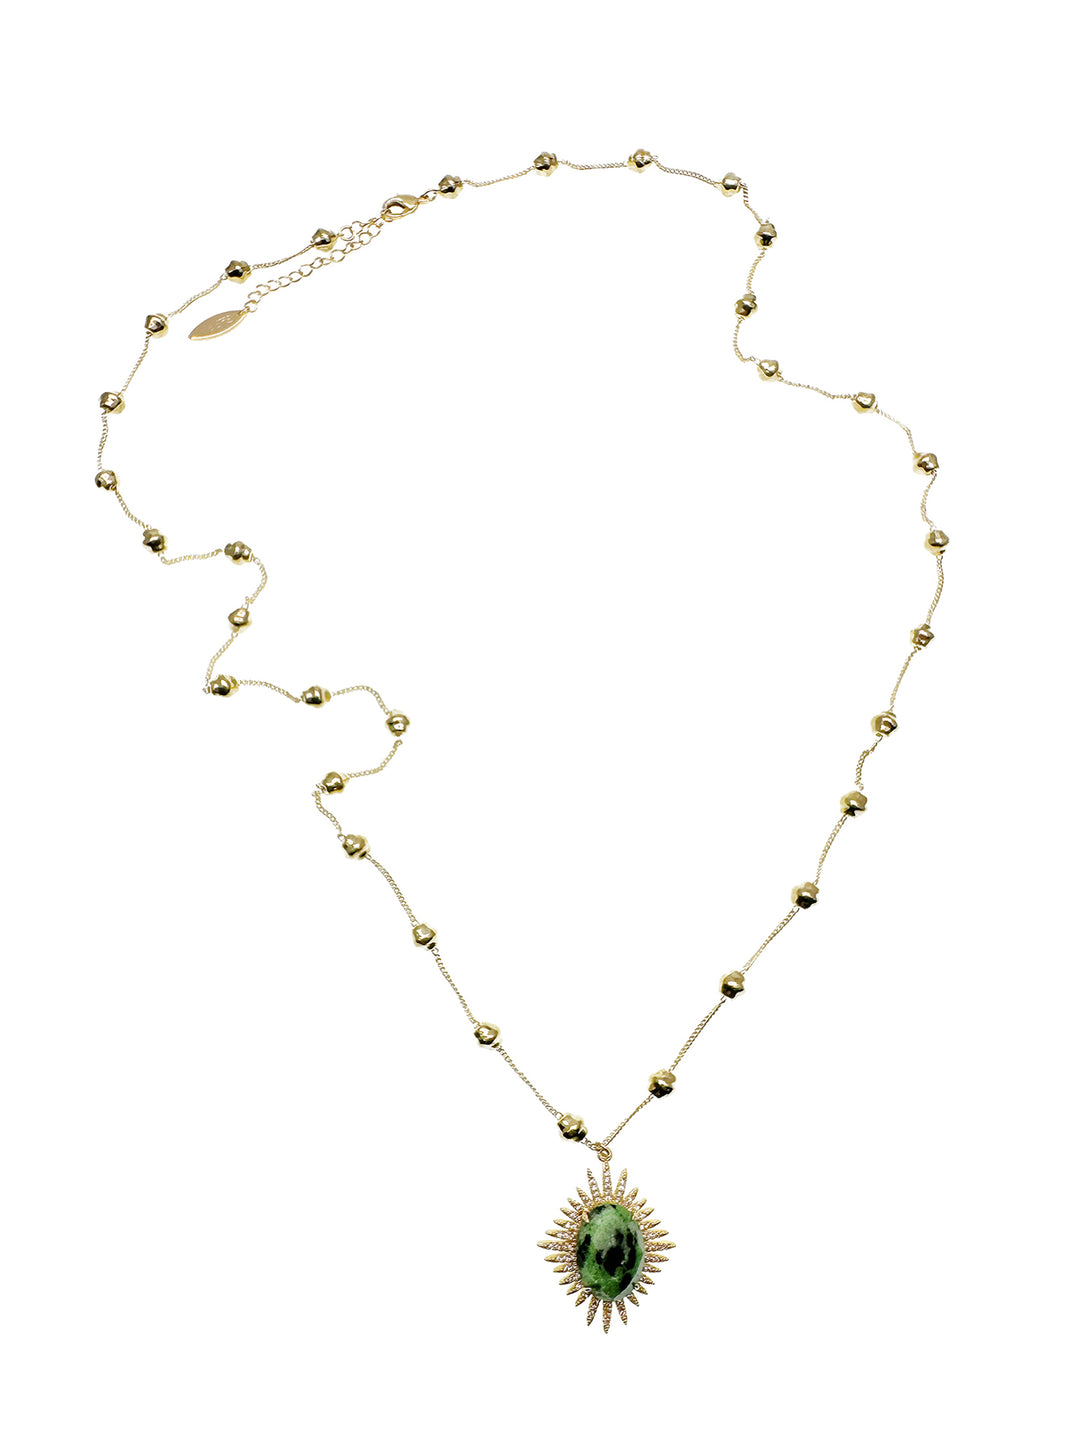 Golden Chain With Zoisite Pendant Necklace KN025 - FARRA